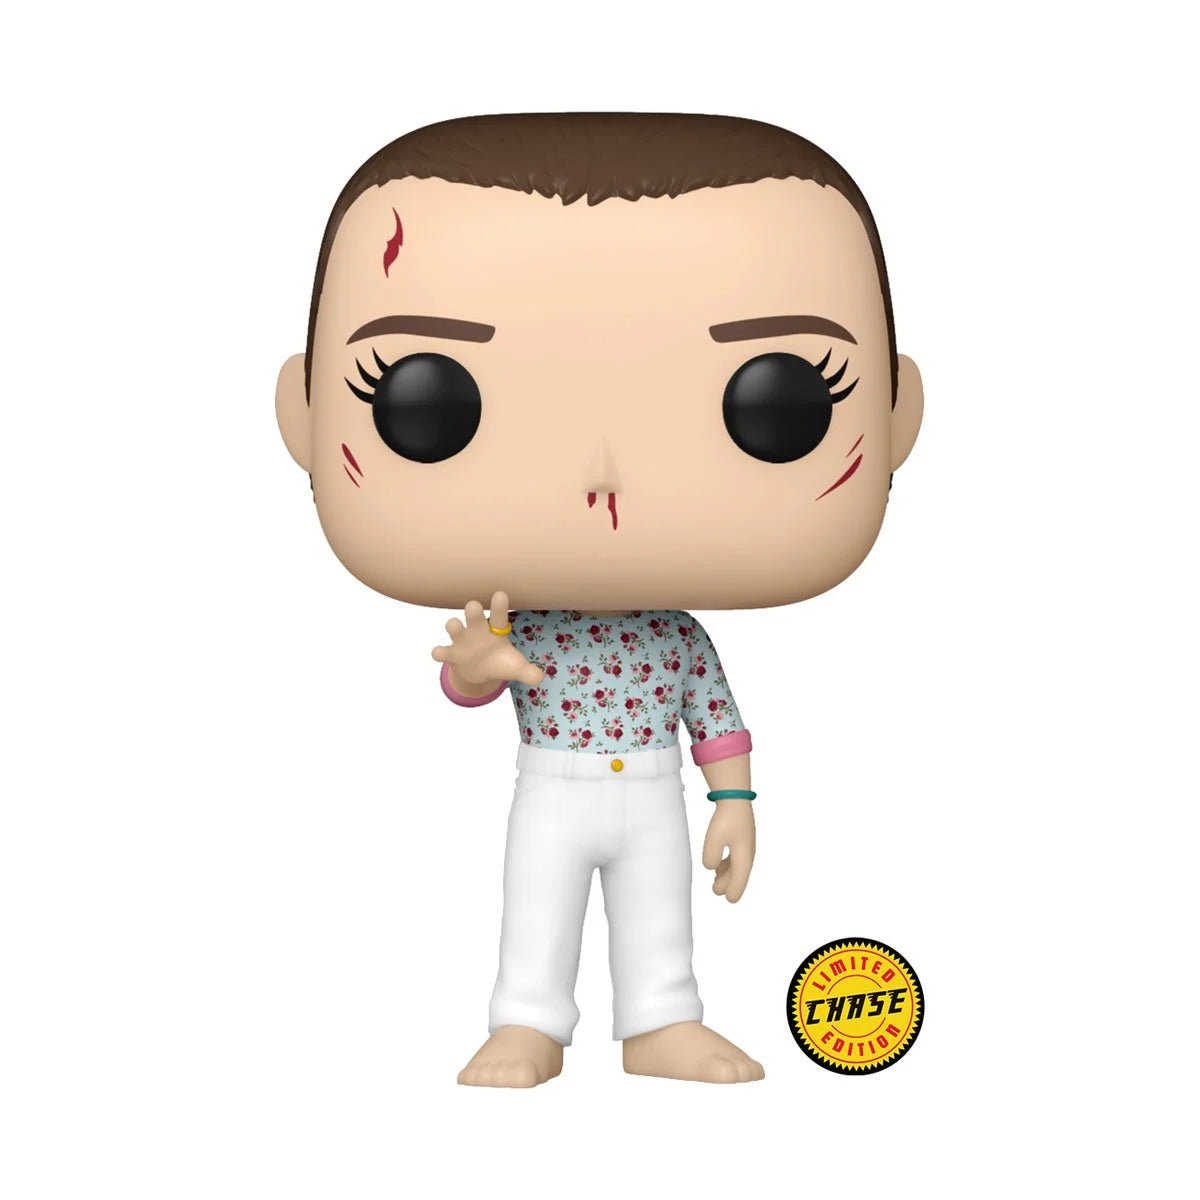 Funko Pop TV: Stranger Things S4 - Eleven Con Camisa Floral